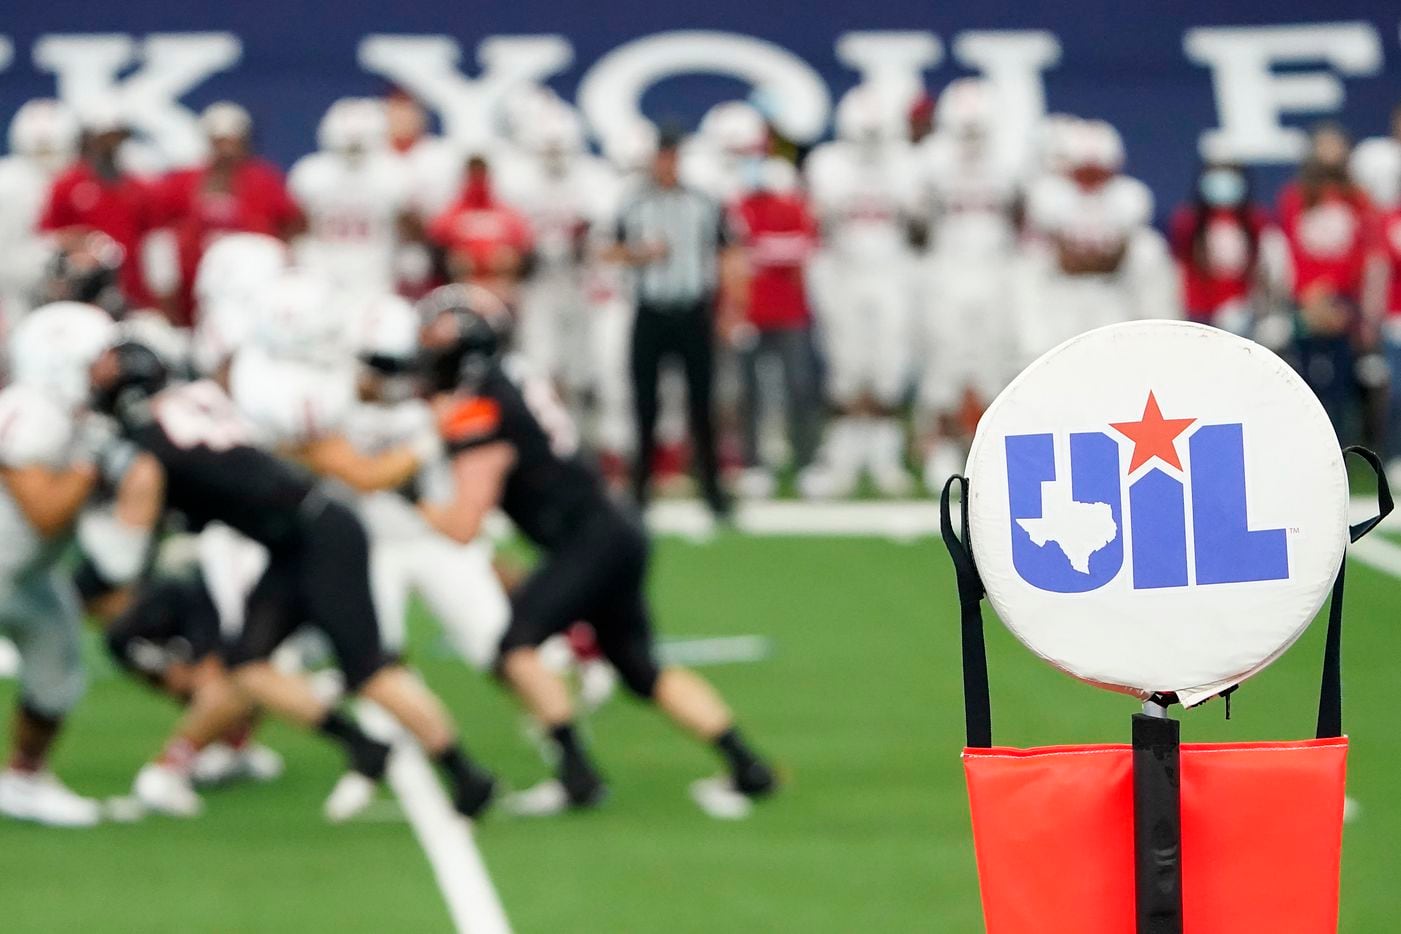 Aledo faces Crosby during the first half of the Class 5A Division II state football championship game at AT&T Stadium on Friday, Jan. 15, 2021, in Arlington. (Smiley N. Pool/The Dallas Morning News)